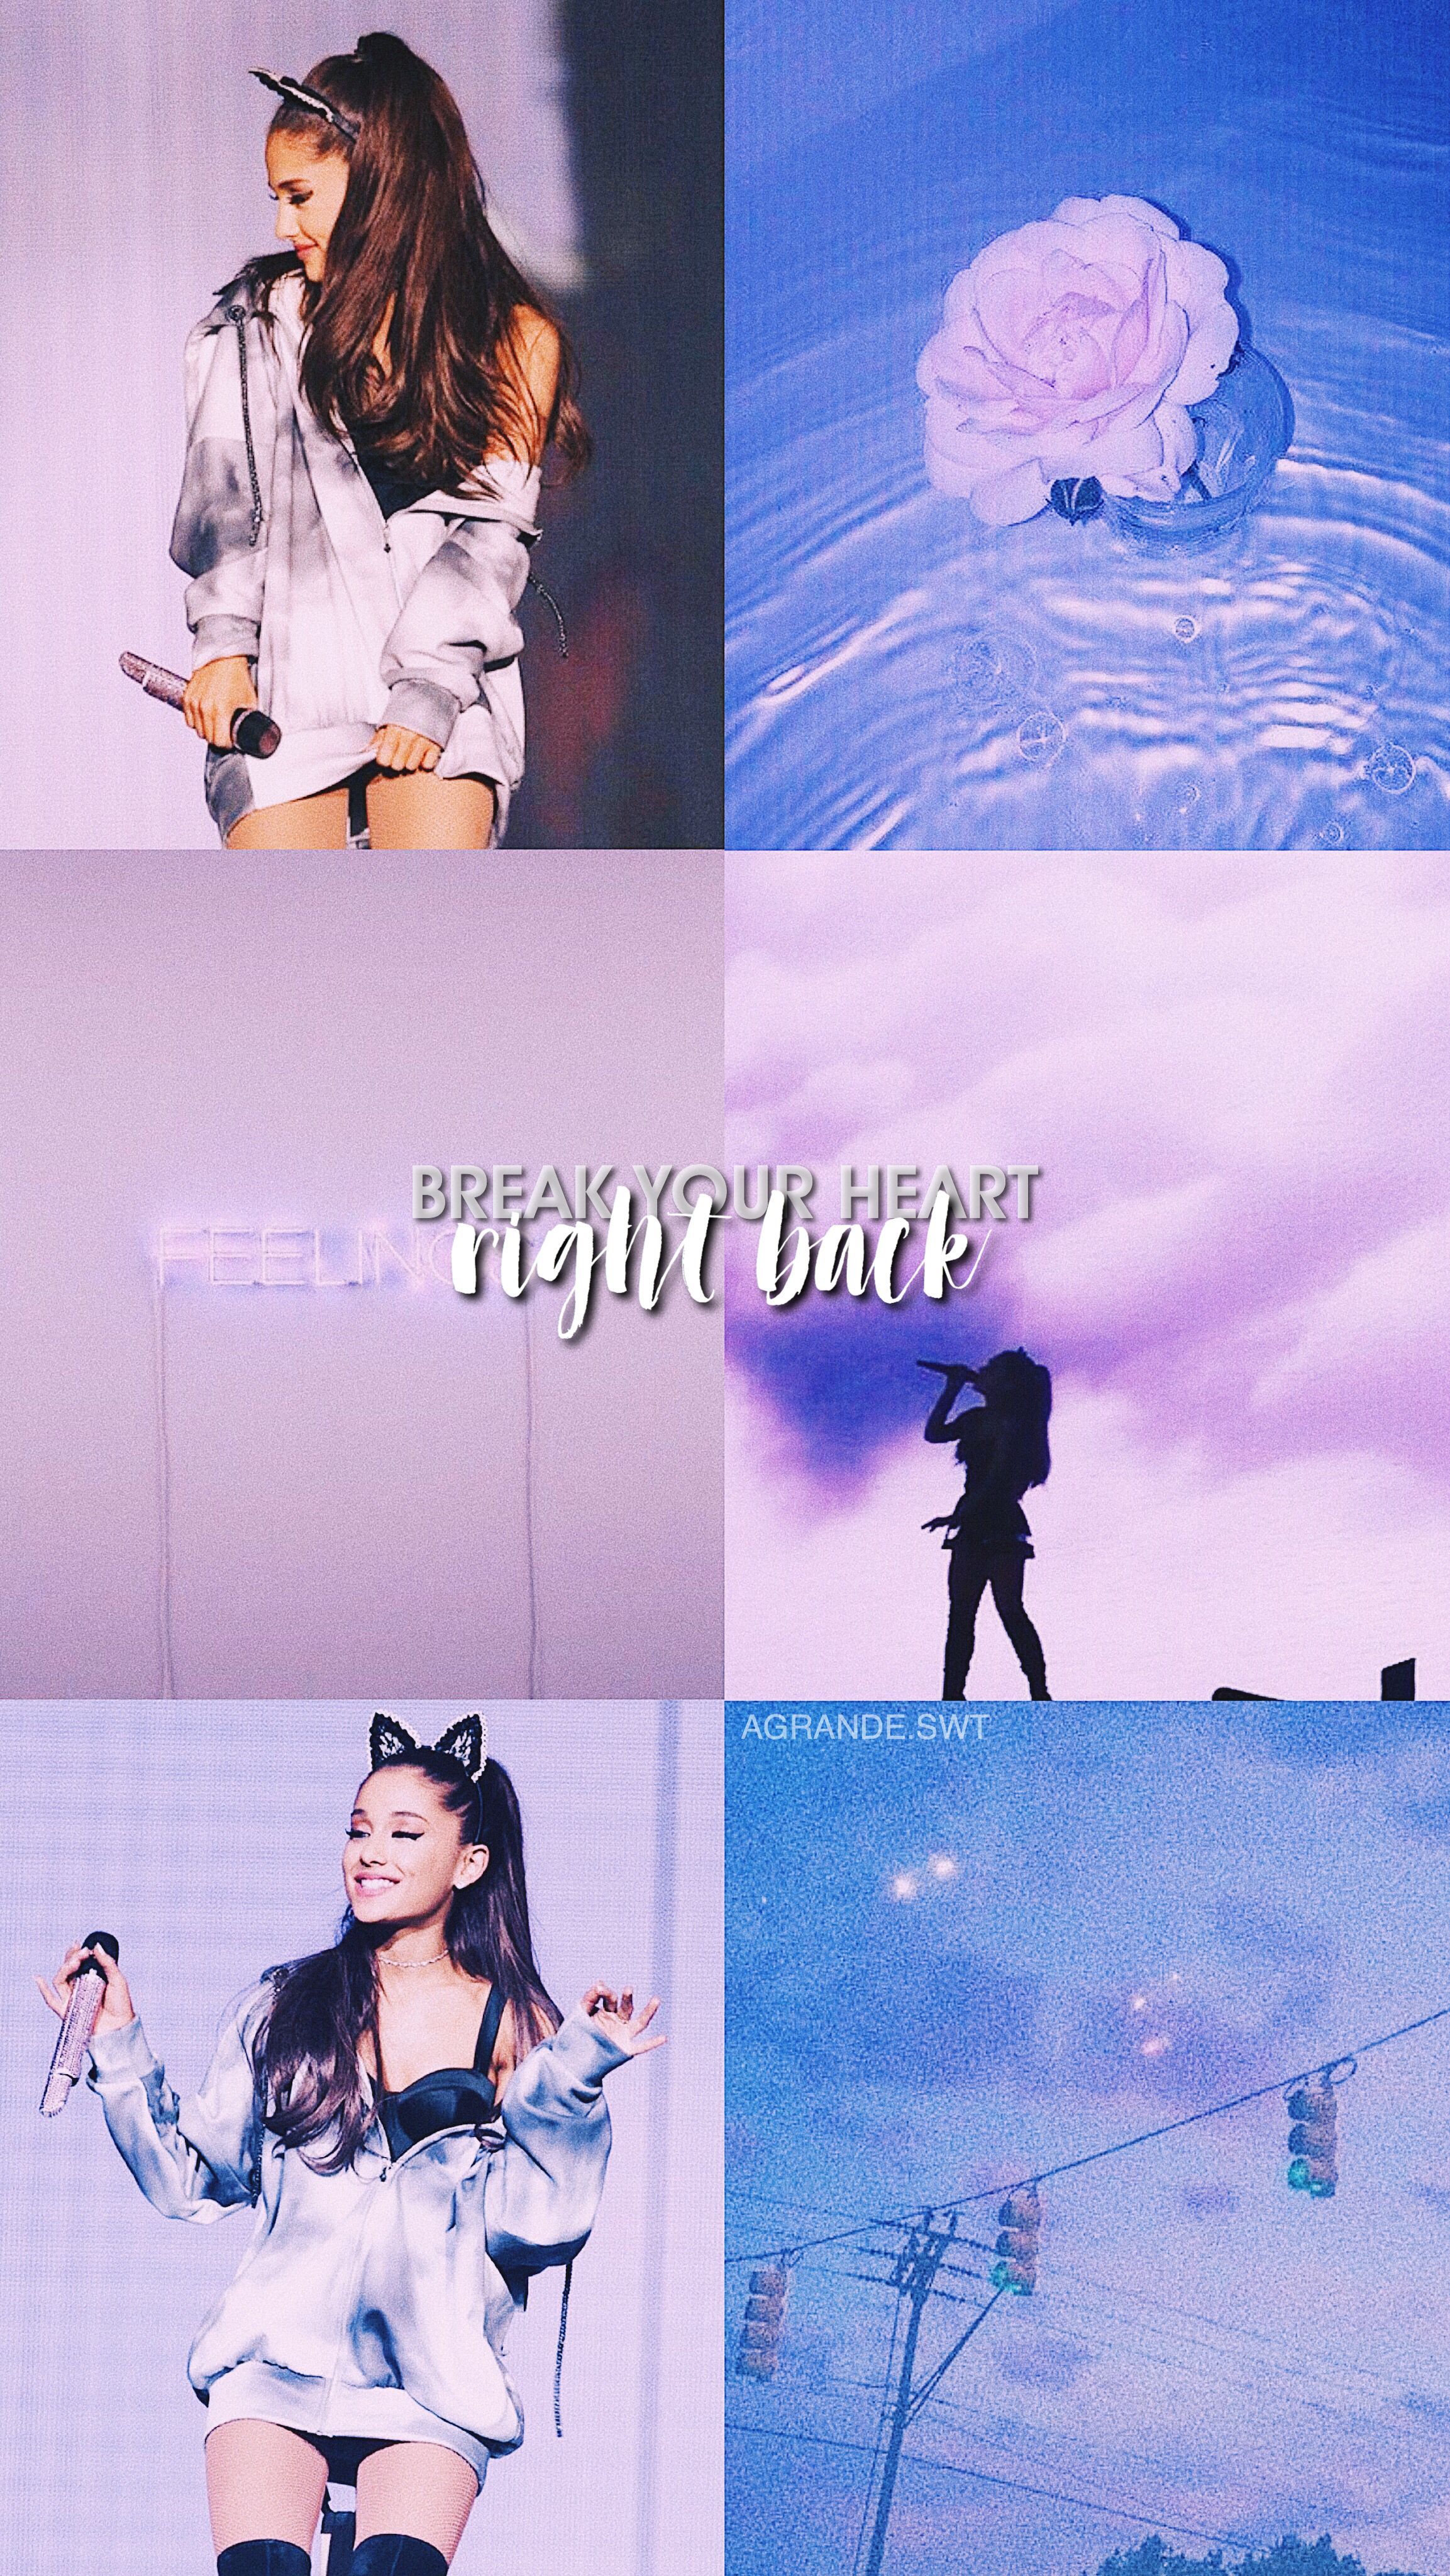 Collage of Ariana Grande in different outfits and in concert. Text in the middle says 